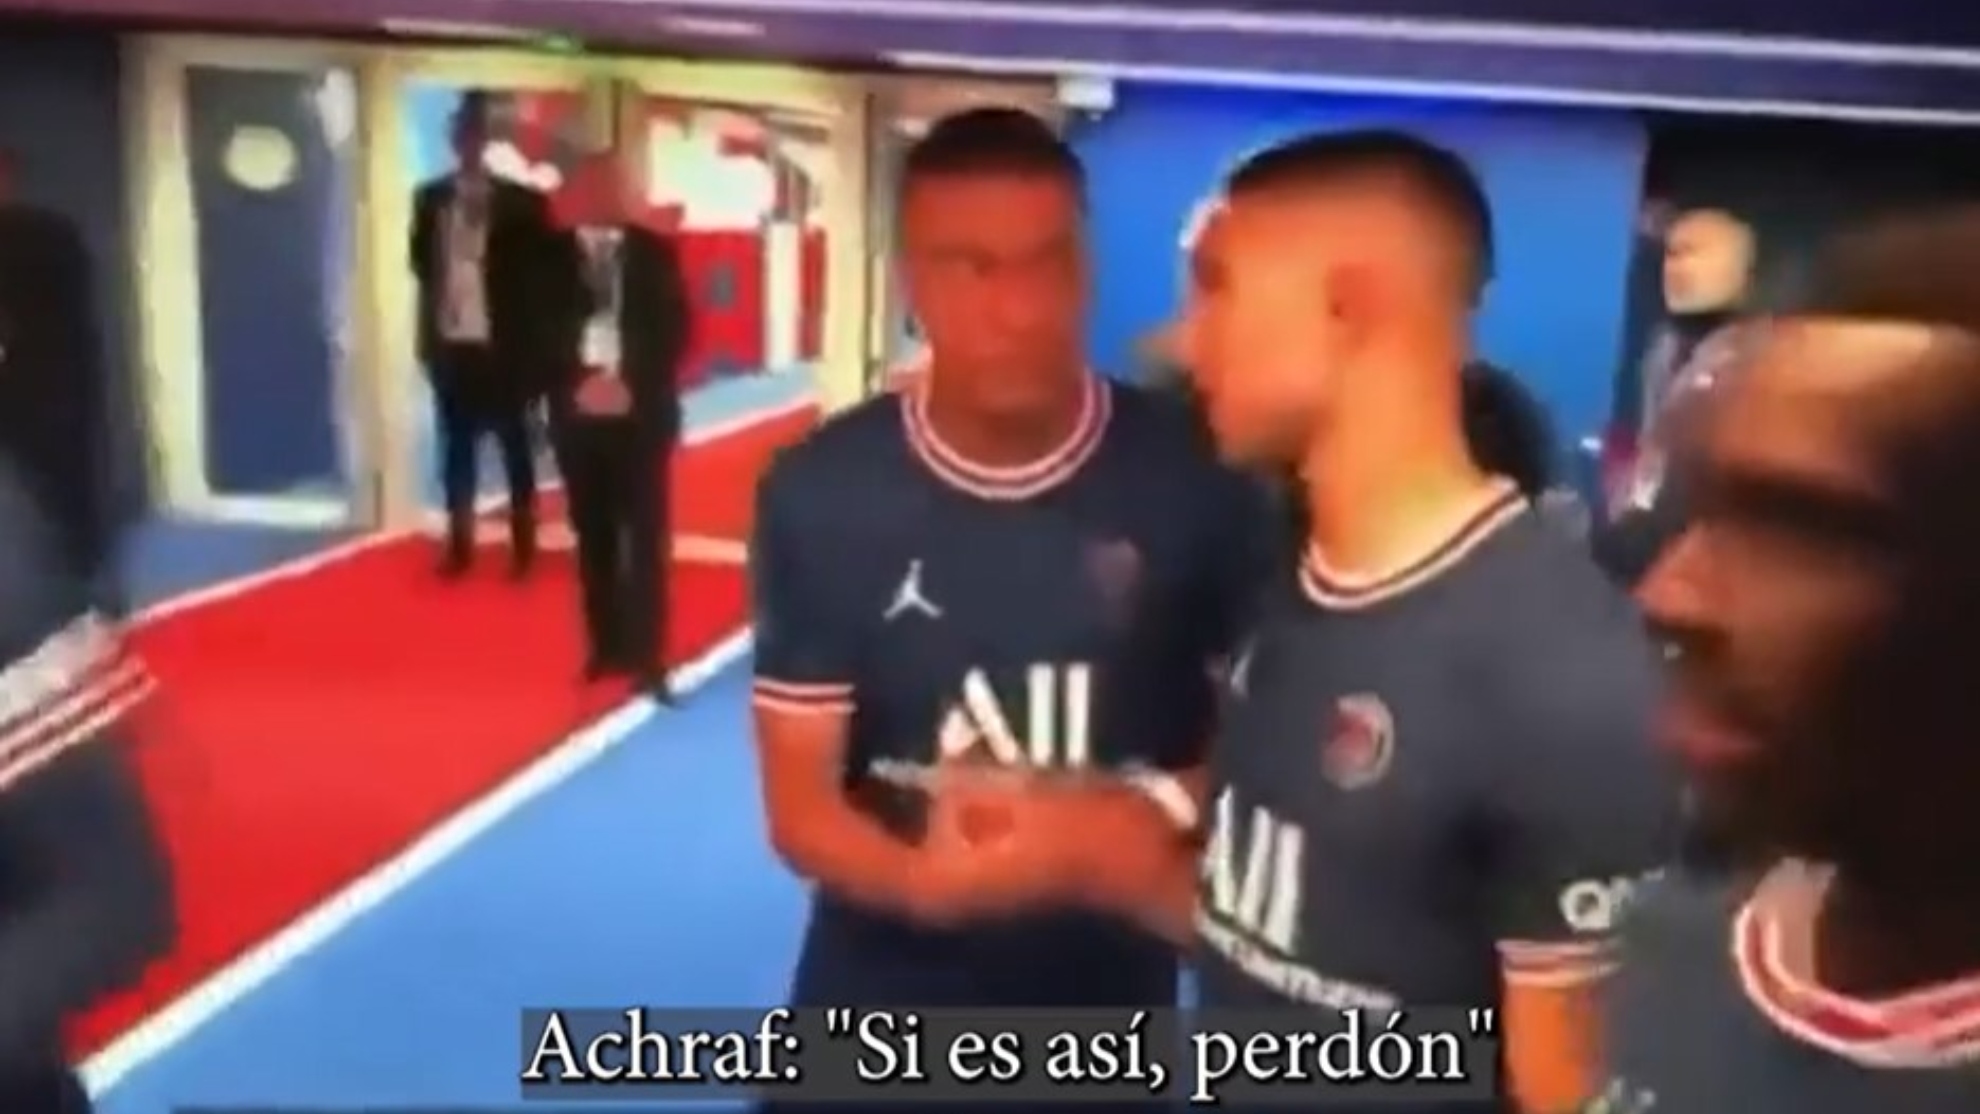 Mbappé complains to Hakimi: "Being sorry isn't good enough"